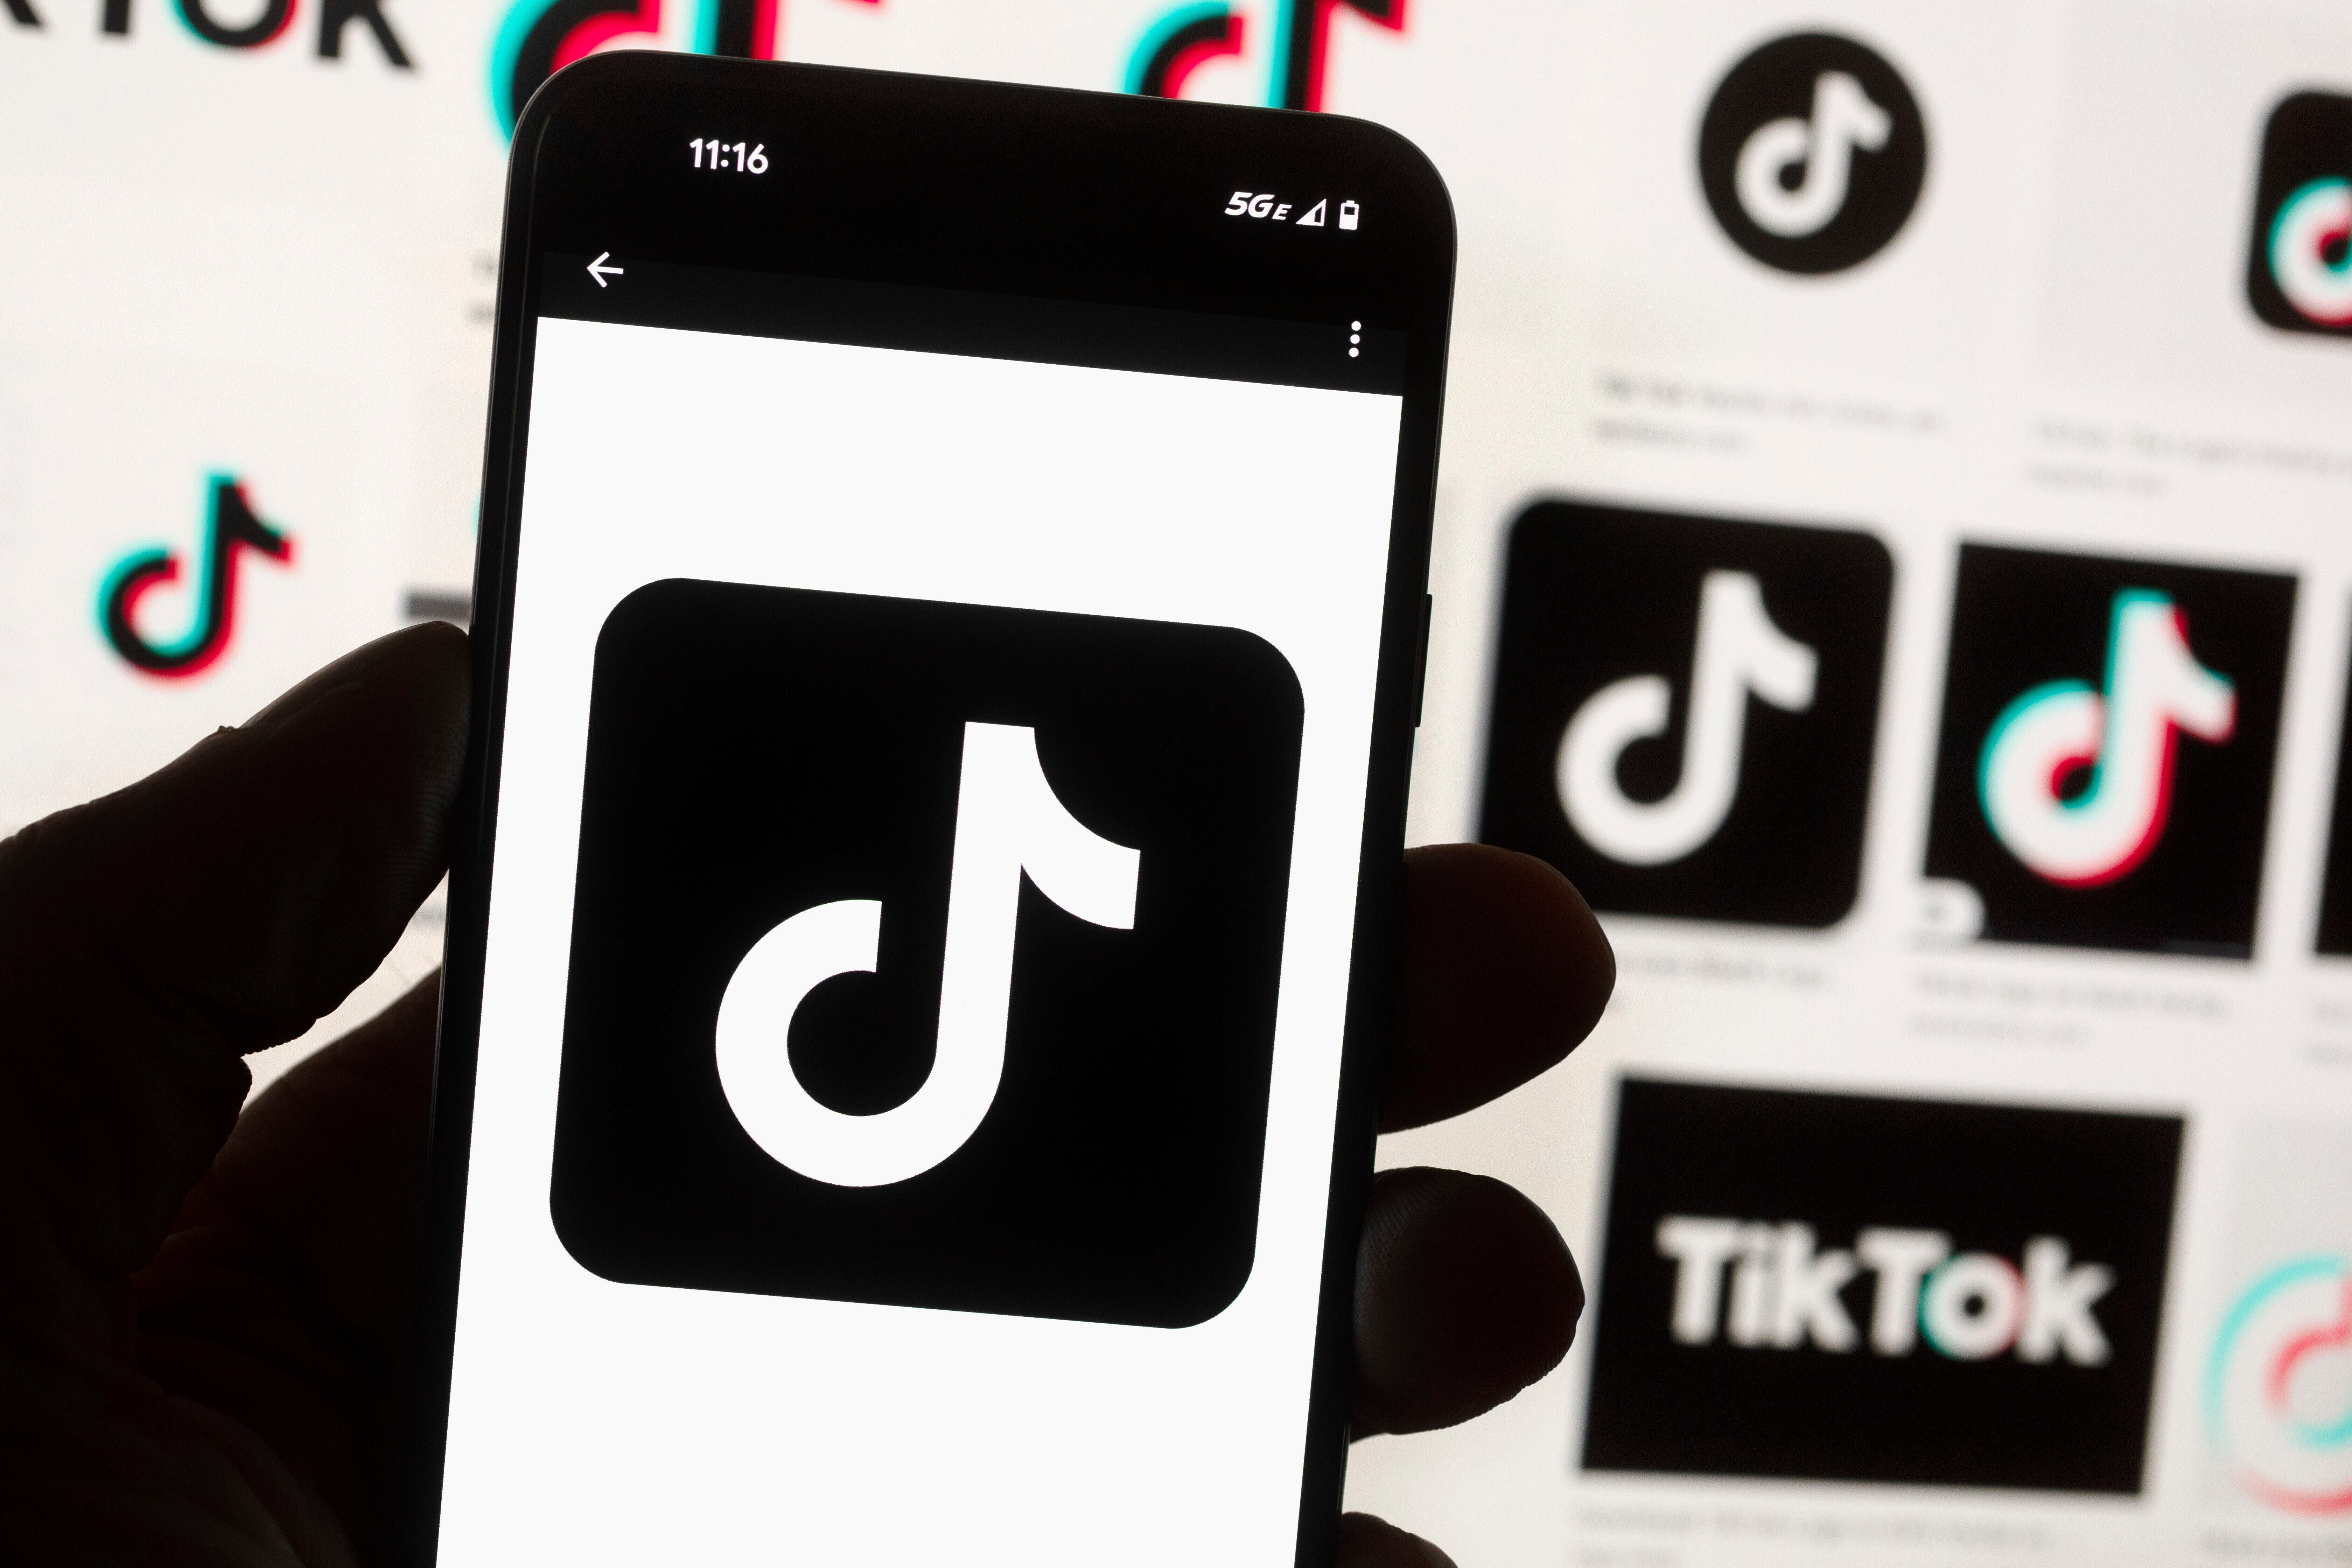 TikTok says it is in talks with US government to ‘satisfy all reasonable US national security concerns’